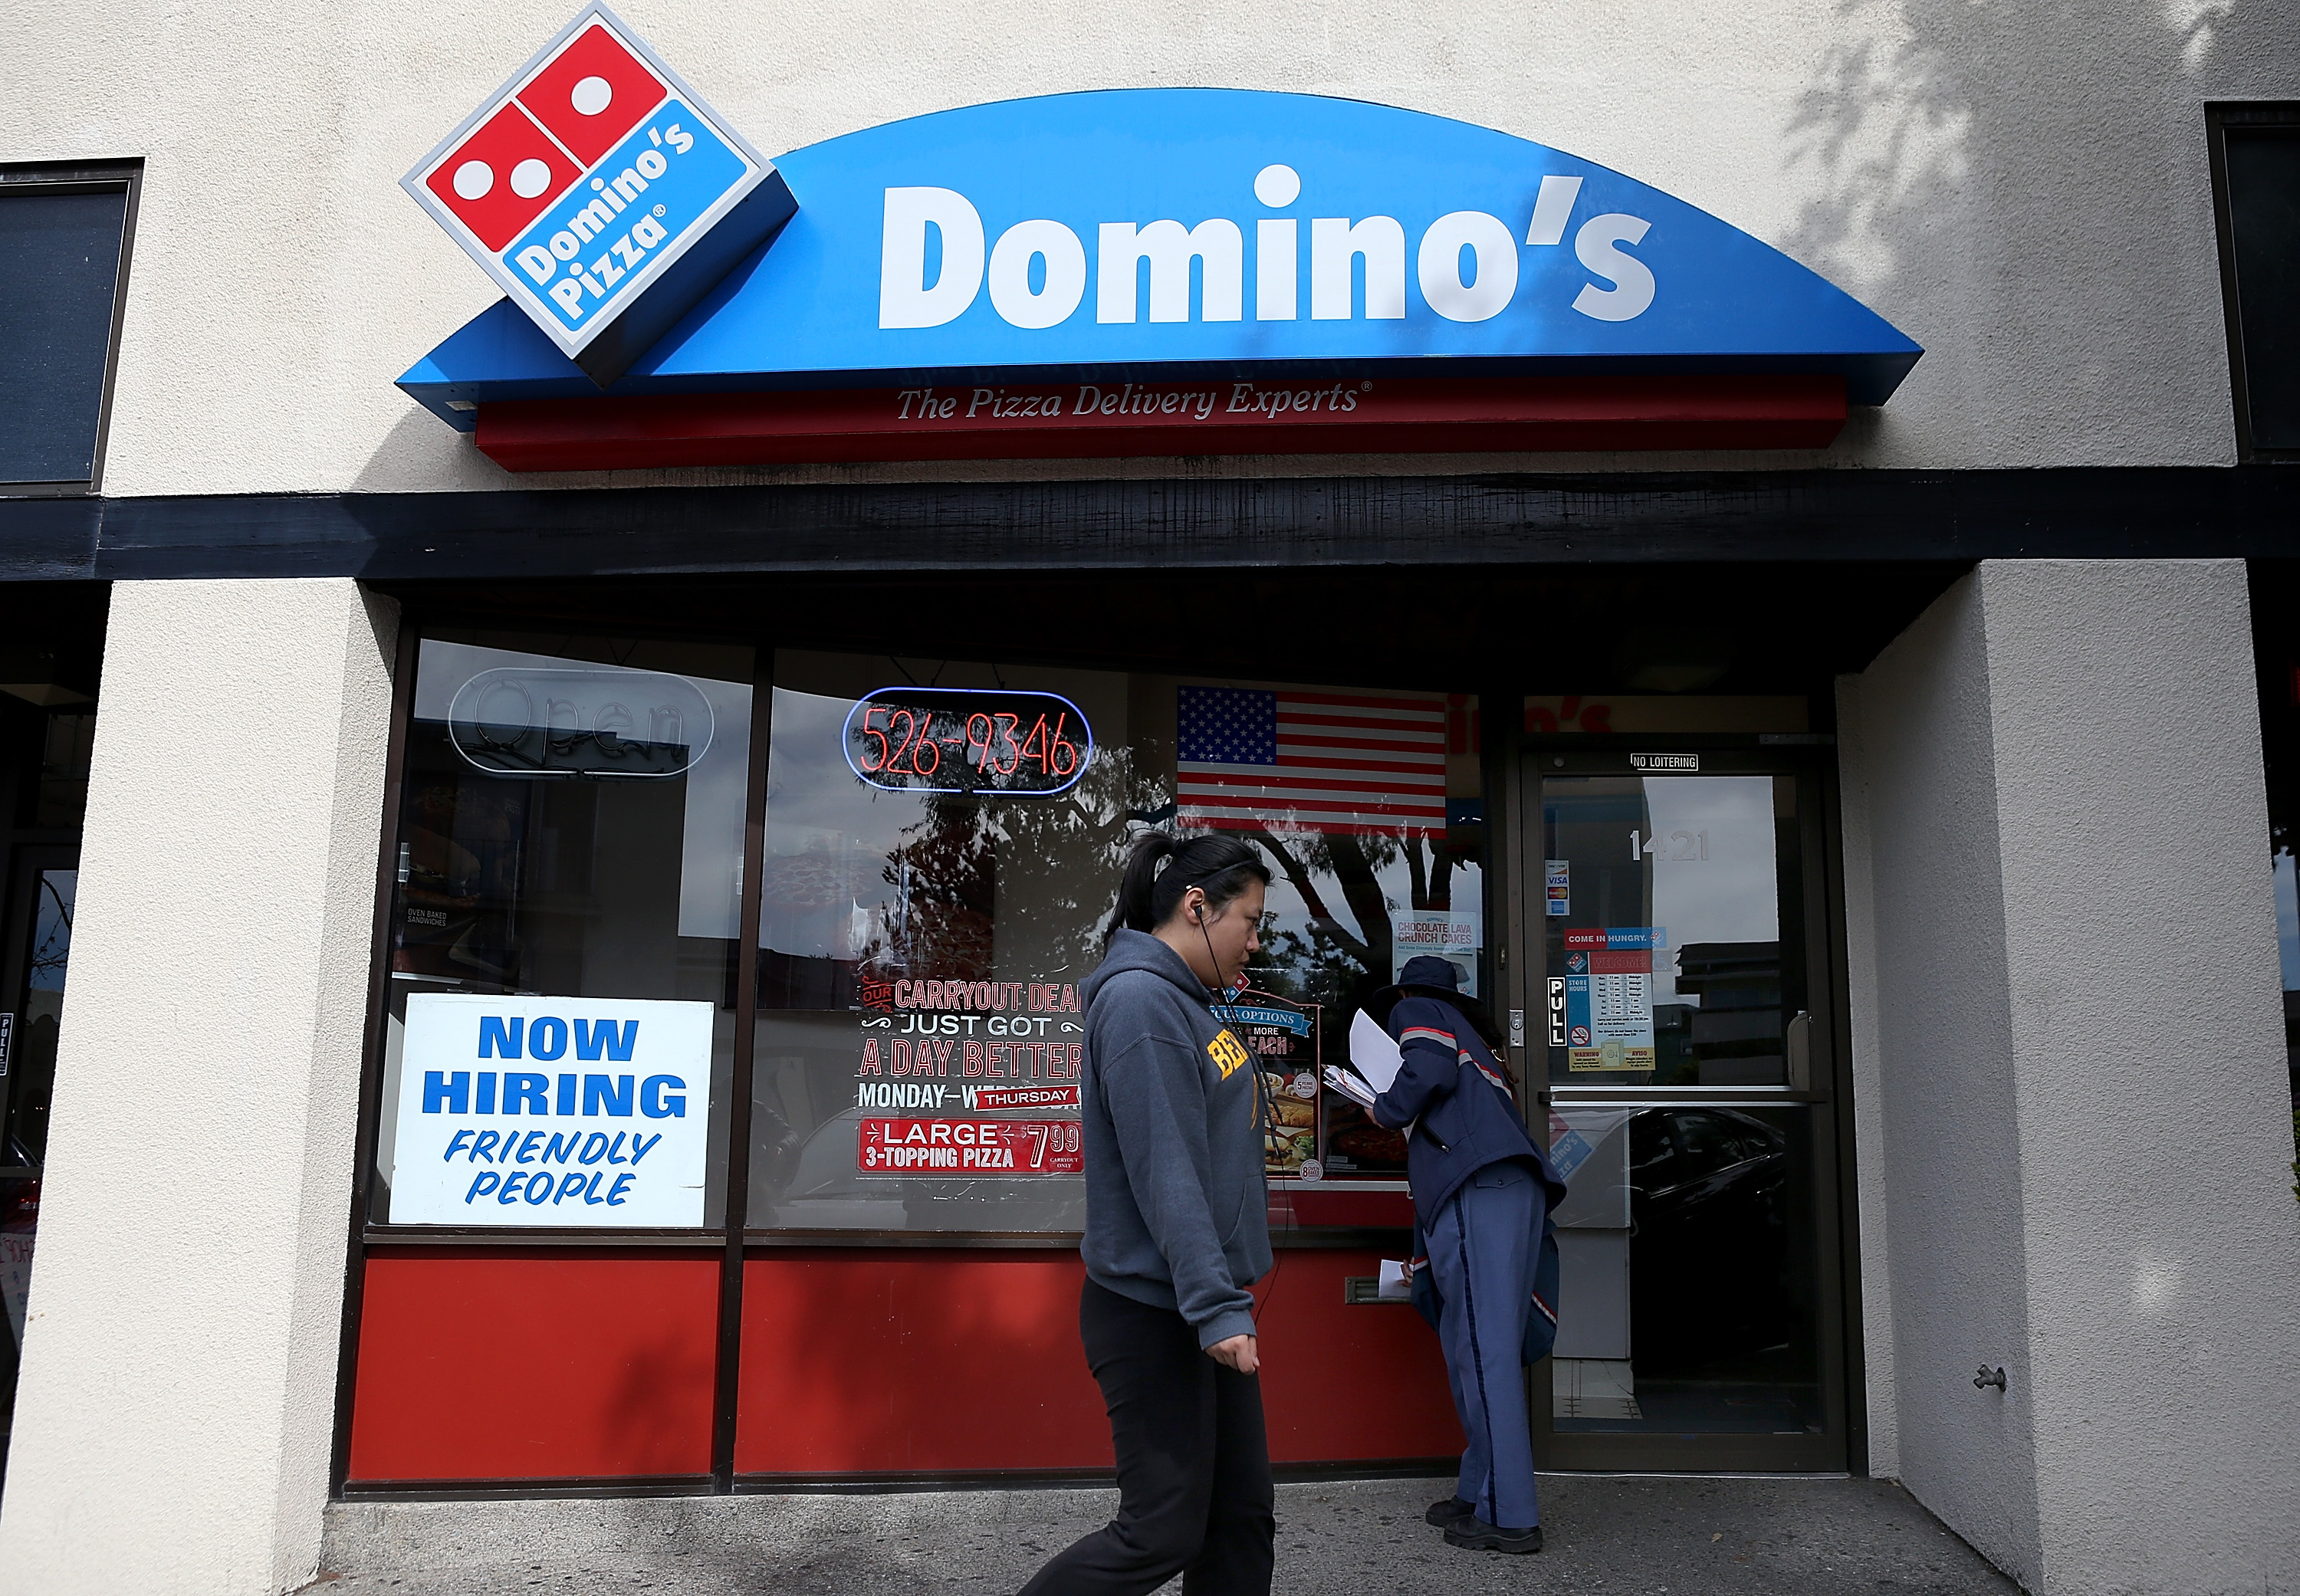 A person walks by the facade of a Domino’s Pizza restaurant